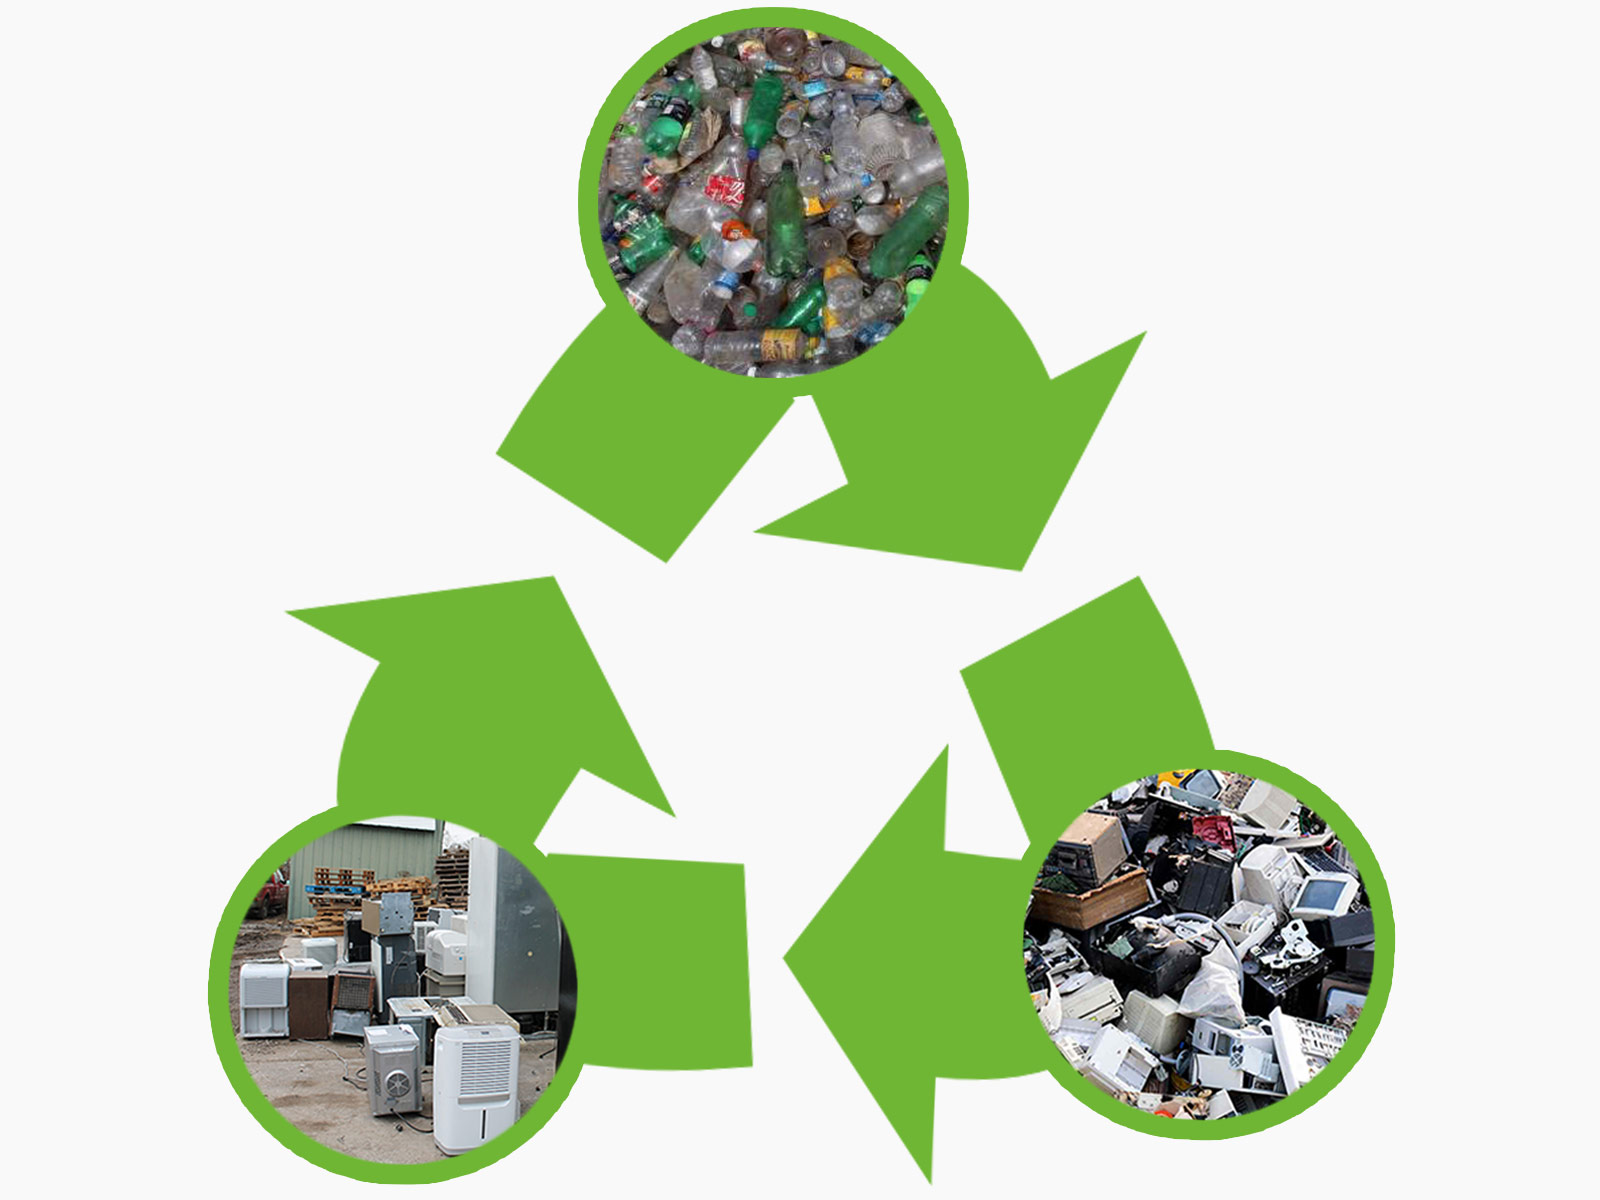 Recycle- Reuse and Disposal by RPlanet